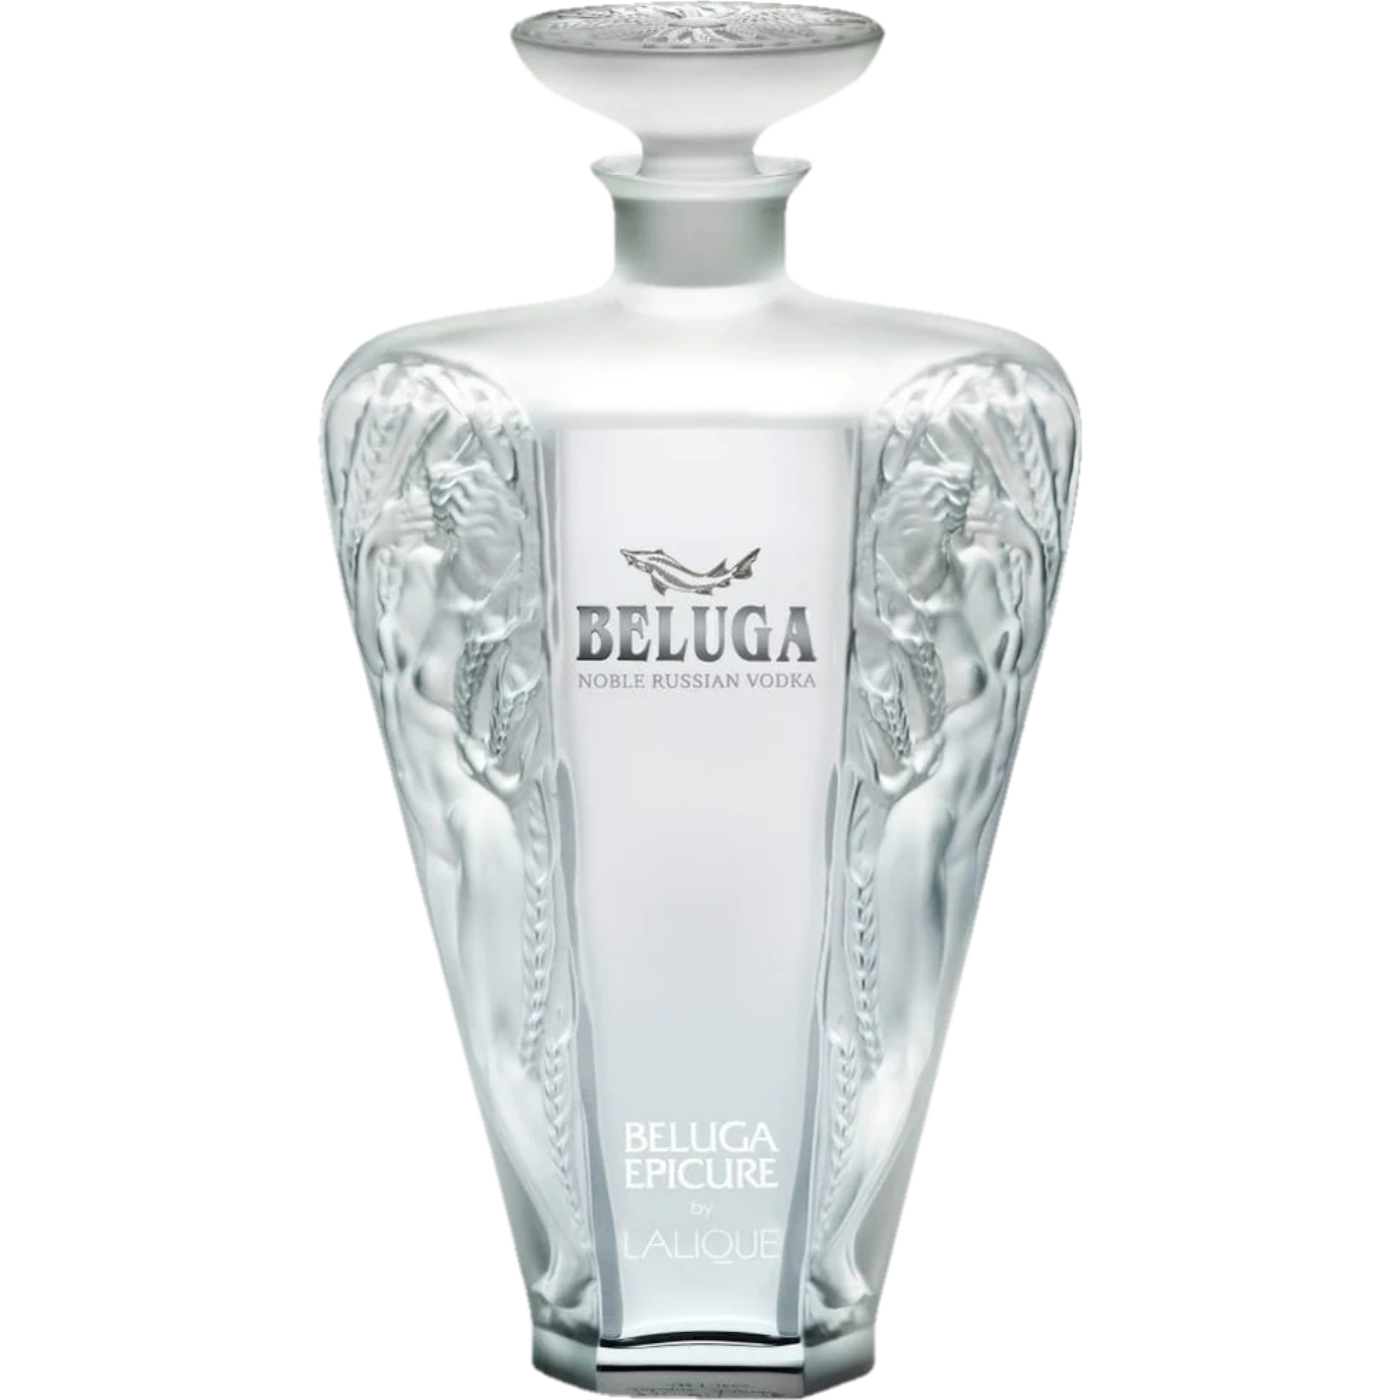 BELUGA EPICURE BY LALIQUE LIMITED EDITION VODKA